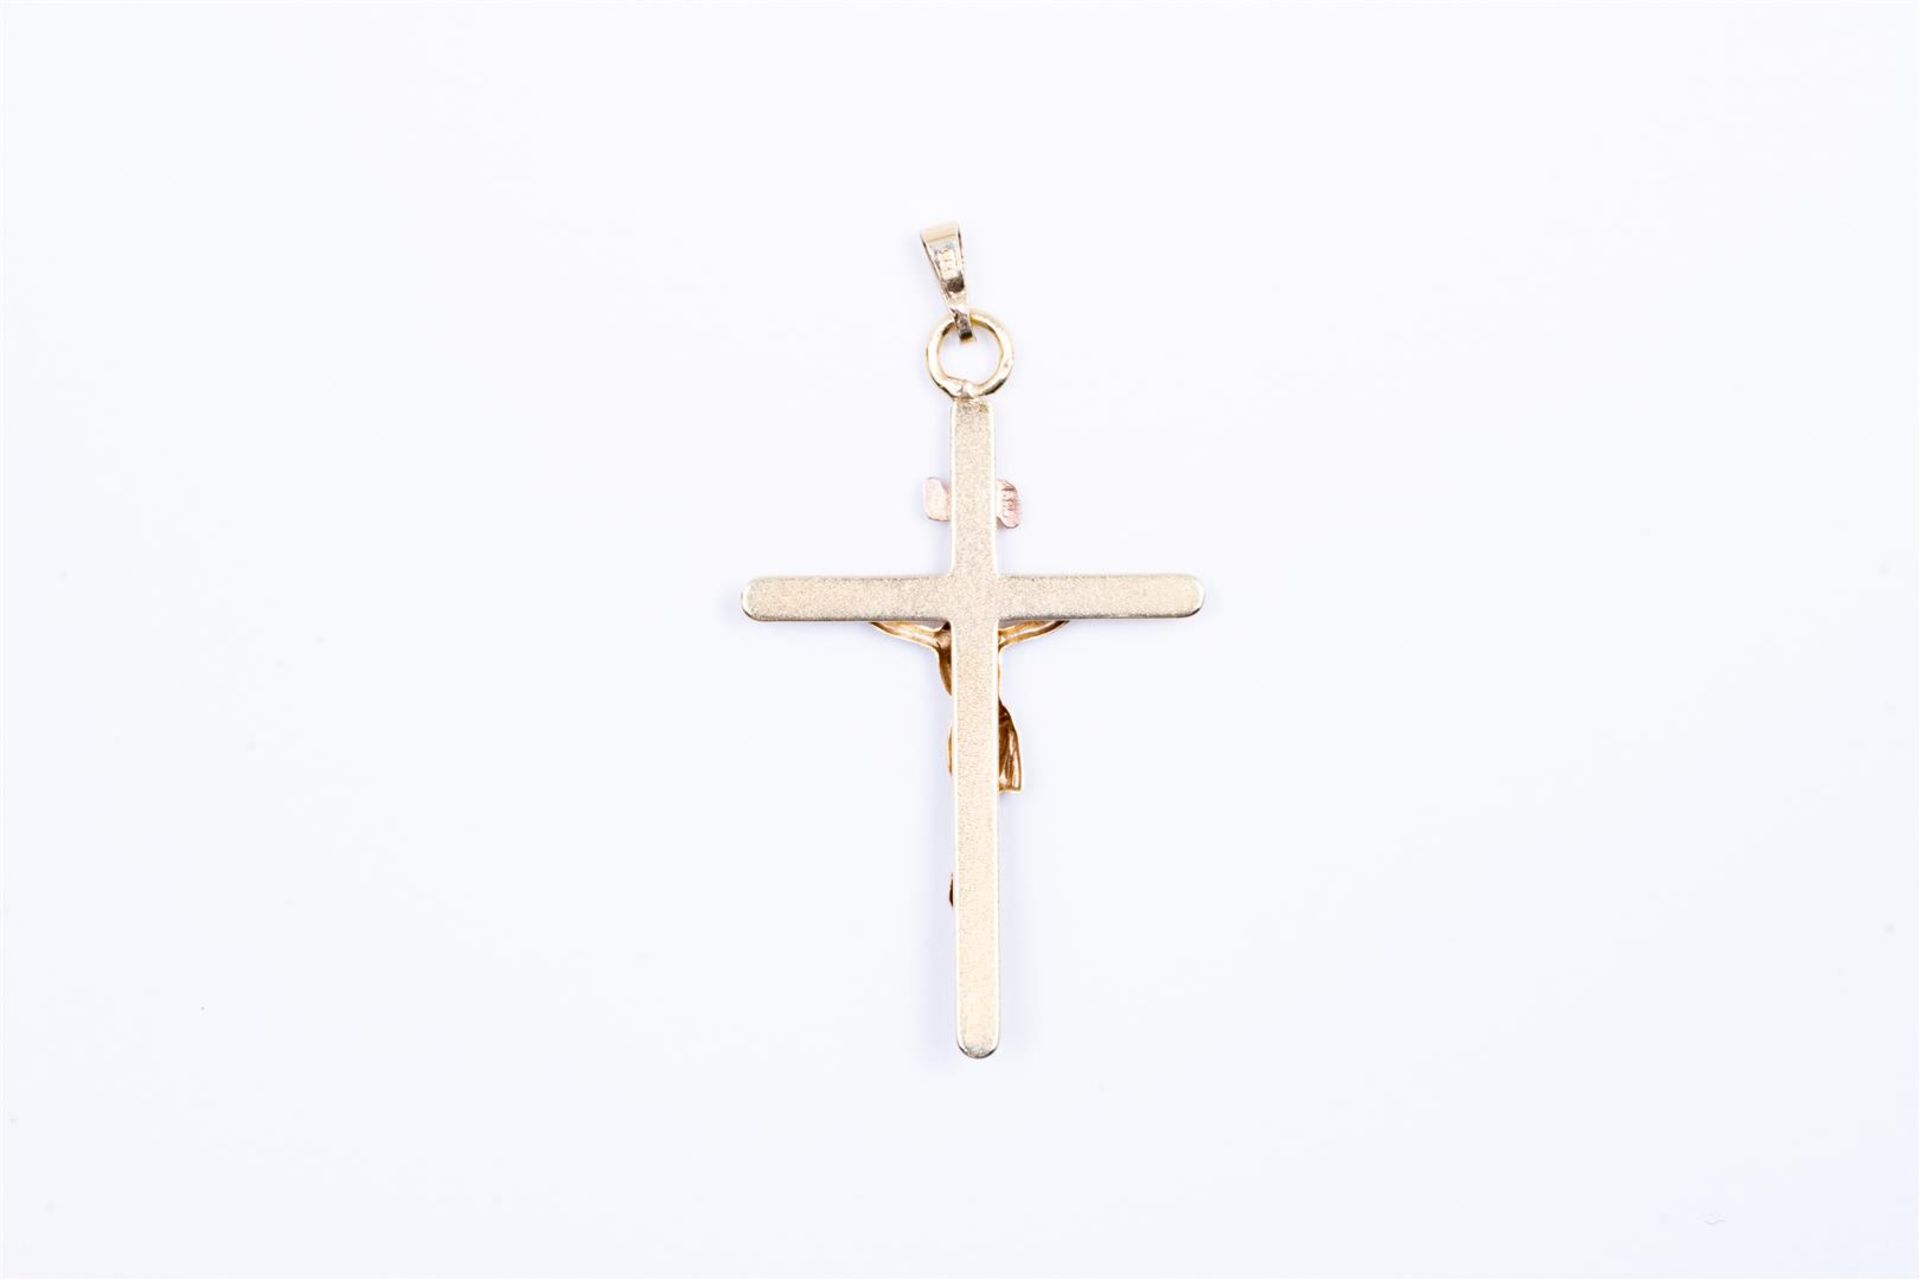 14kt bicolor gold cross pendant.
The cross is beautifully finished with great attention to detail. J - Bild 2 aus 2